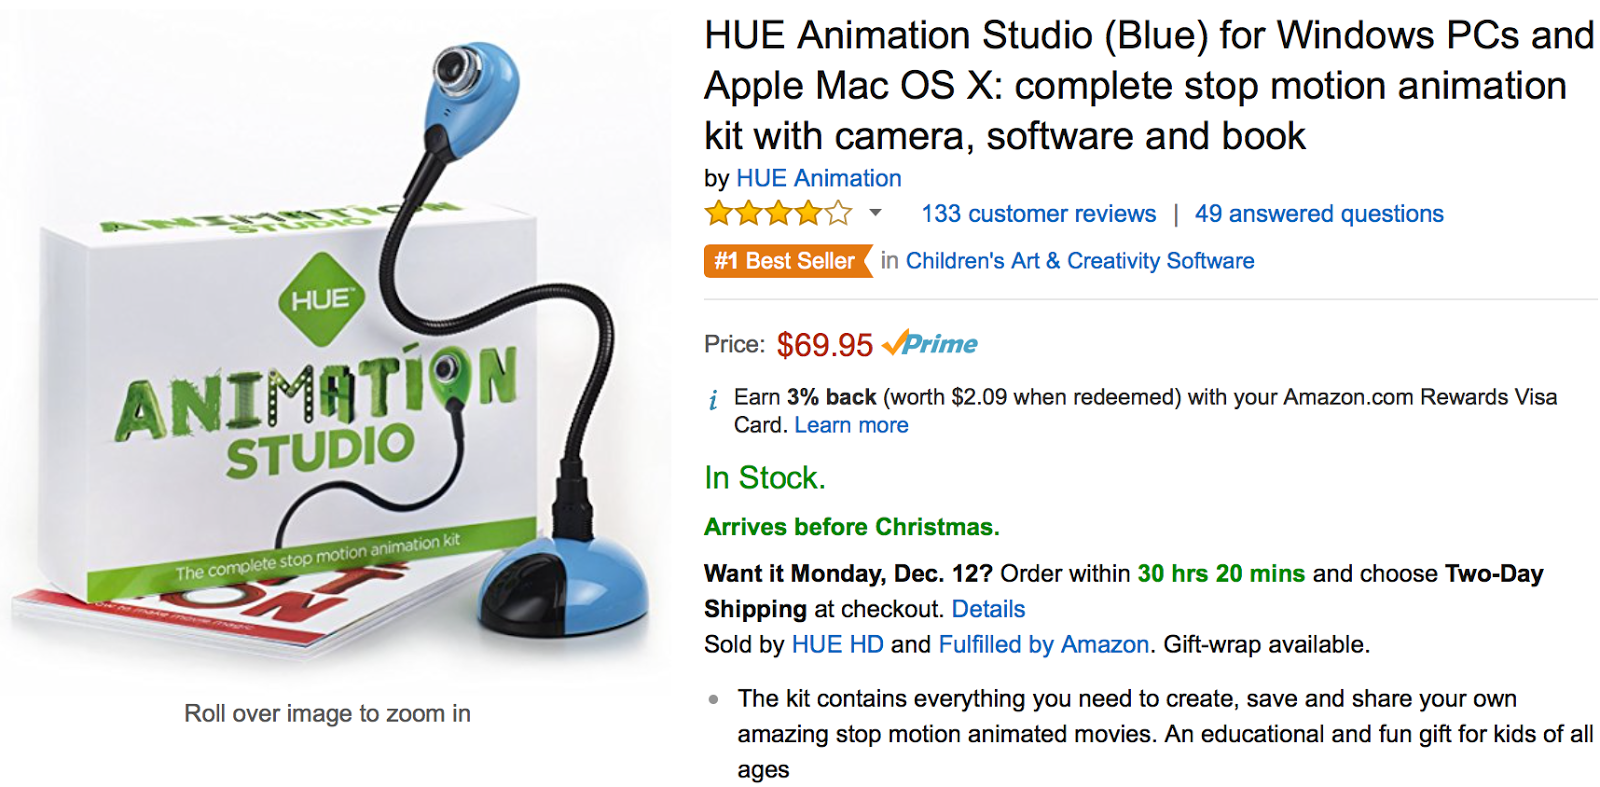 Hue Animation Stop Motion Studio Kit with Camera Review